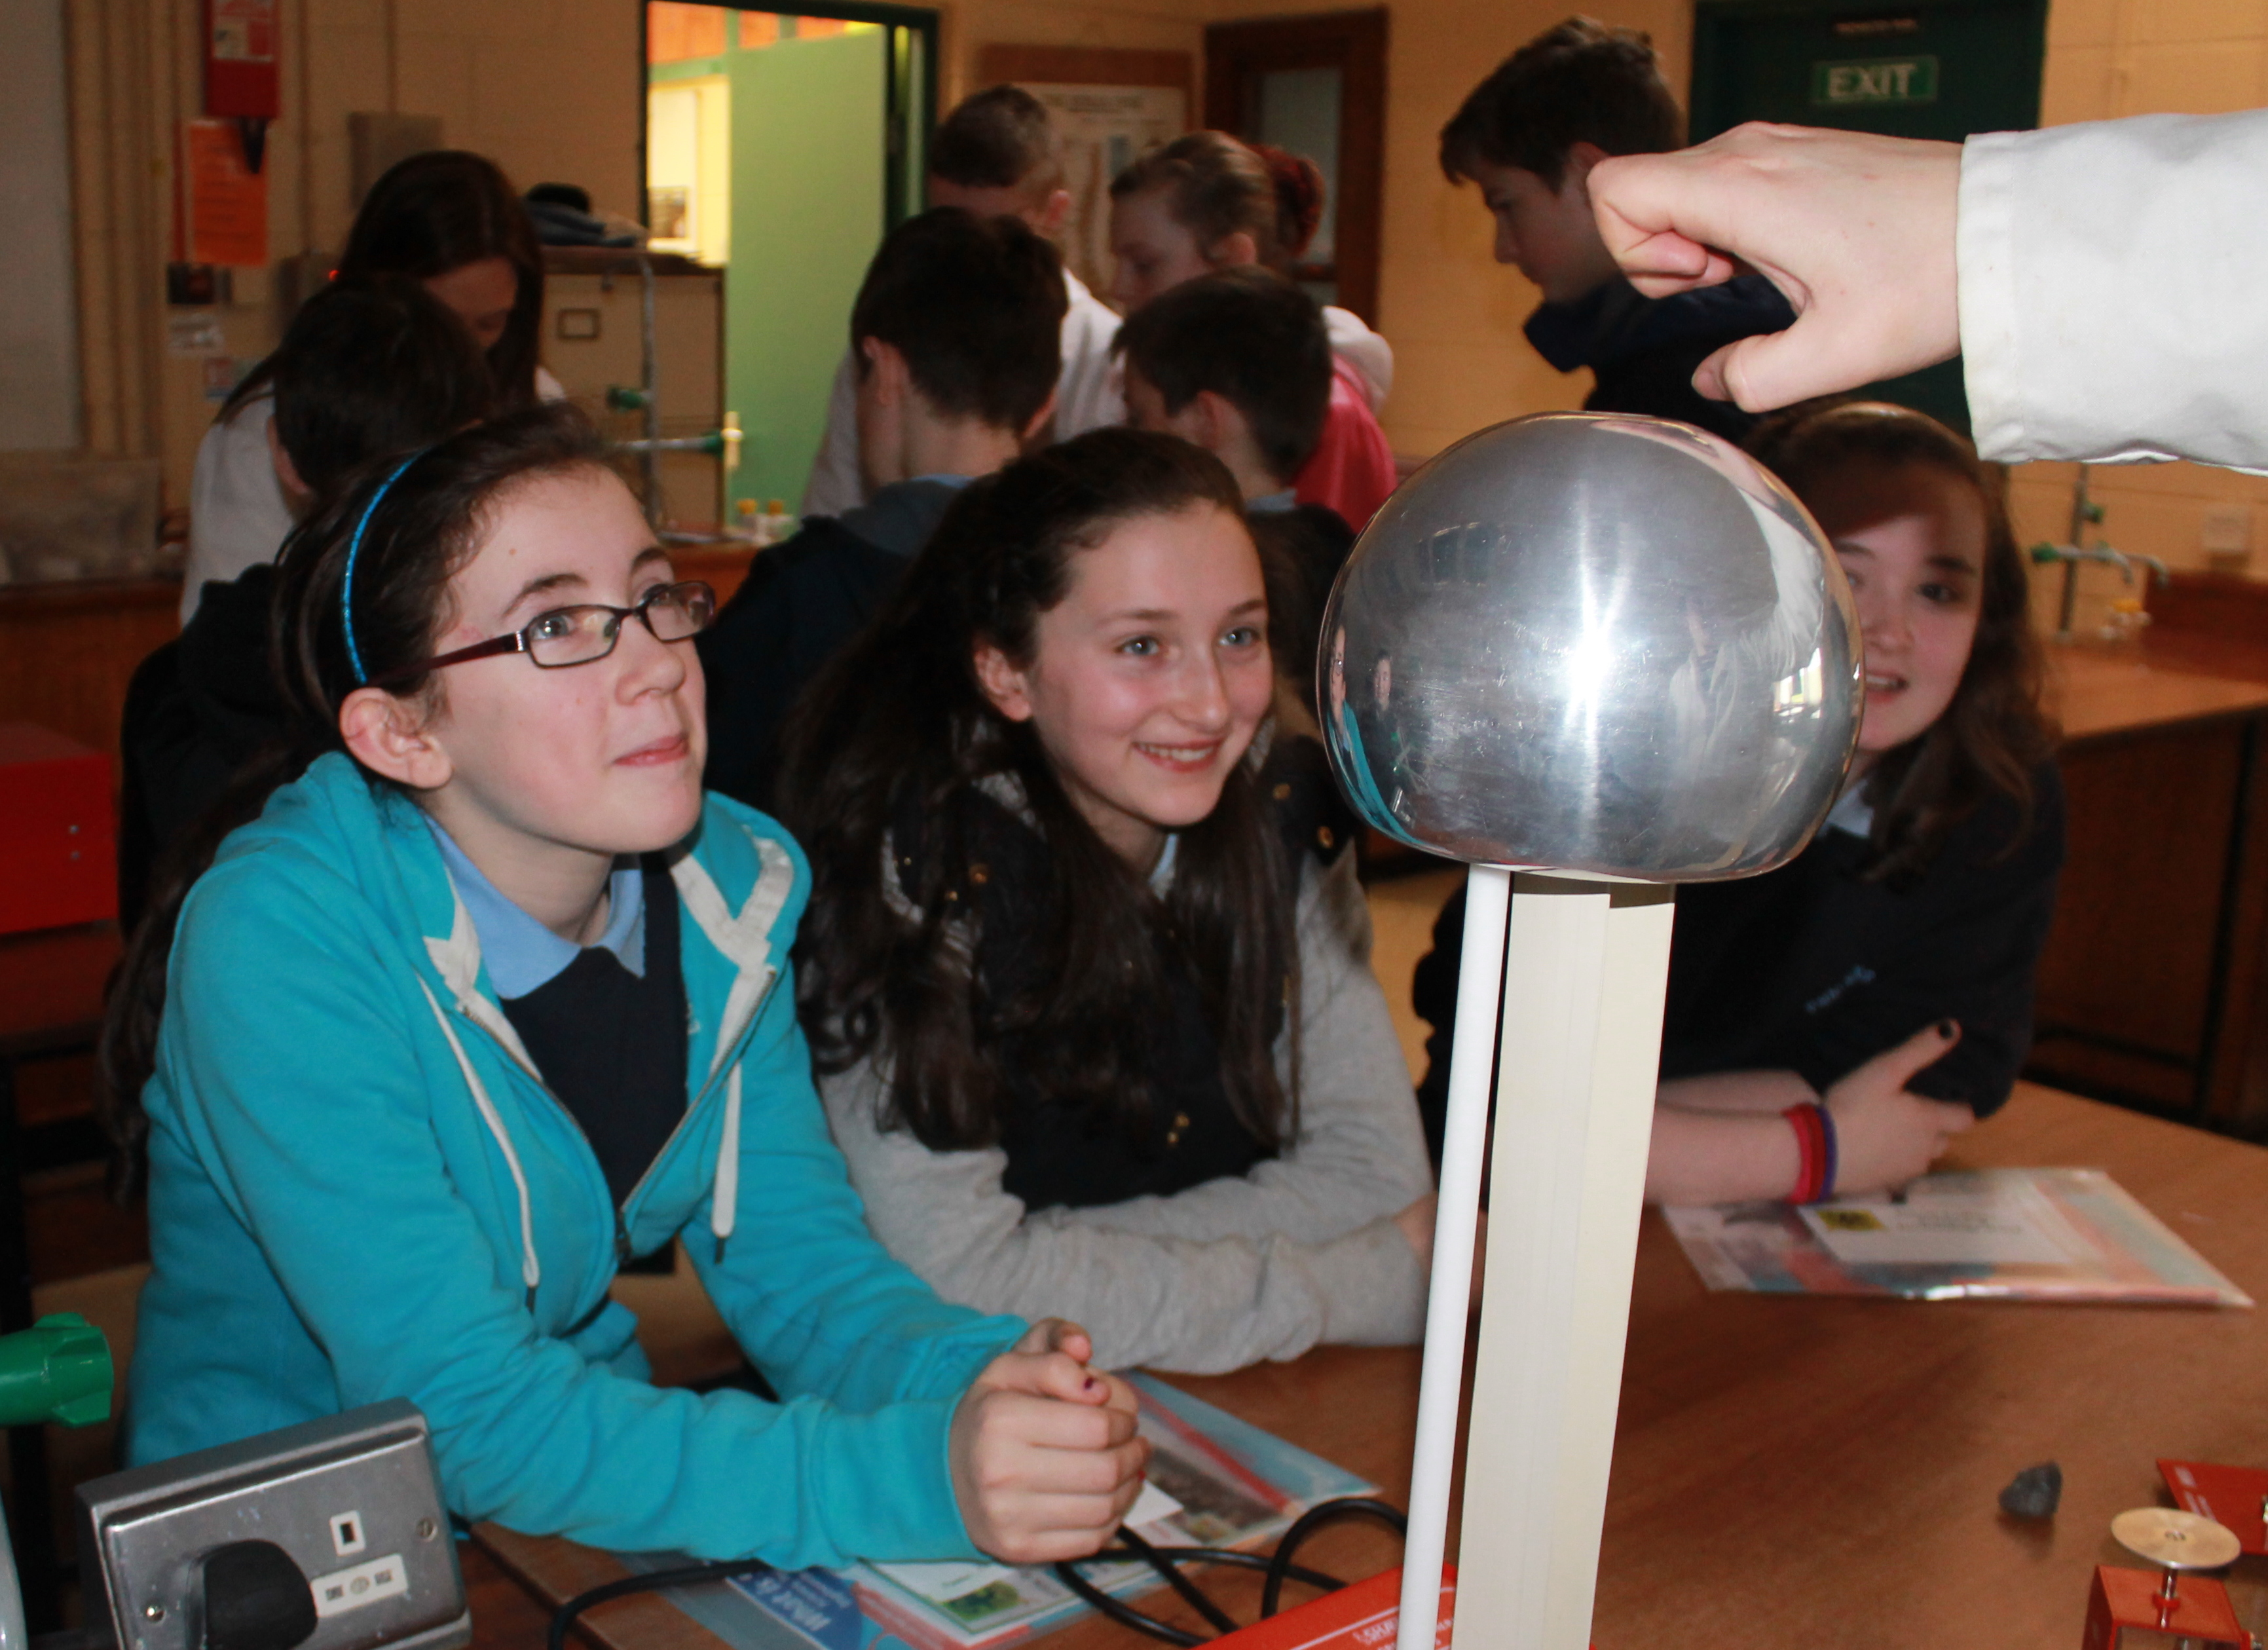 Students from Parke, Castlebar are intrigued as they are shown Static Electricity during Science & Technology Week at Davitt College, a four-day science and technology event for sixth class students from national schools in Castlebar and surrounding districts.